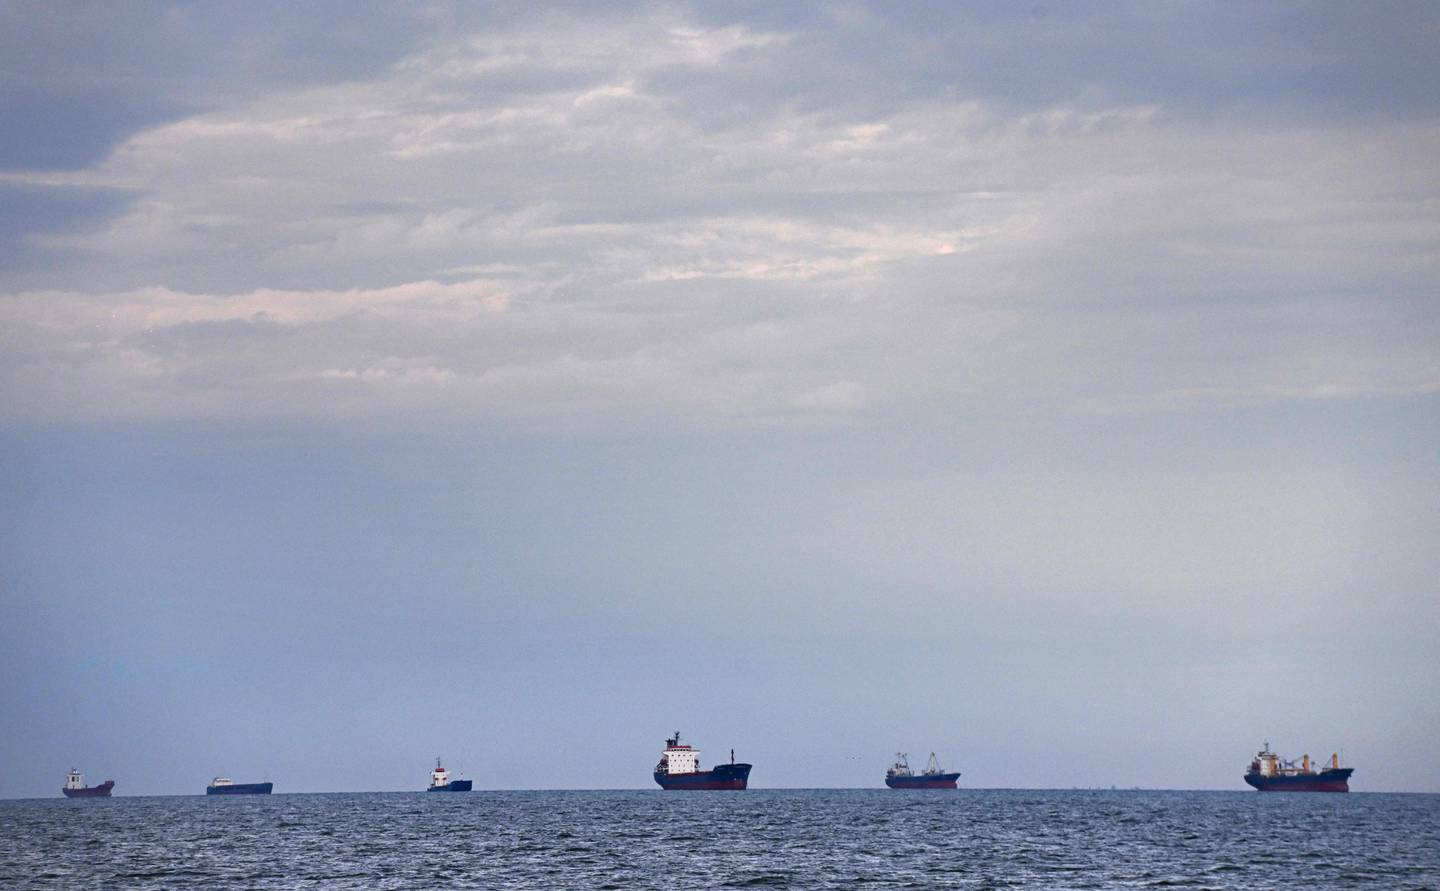 Ships anchored in the Black Sea wait to enter the Sulina canal, one of the spilling points of the river Danube into the Black Sea. AFP